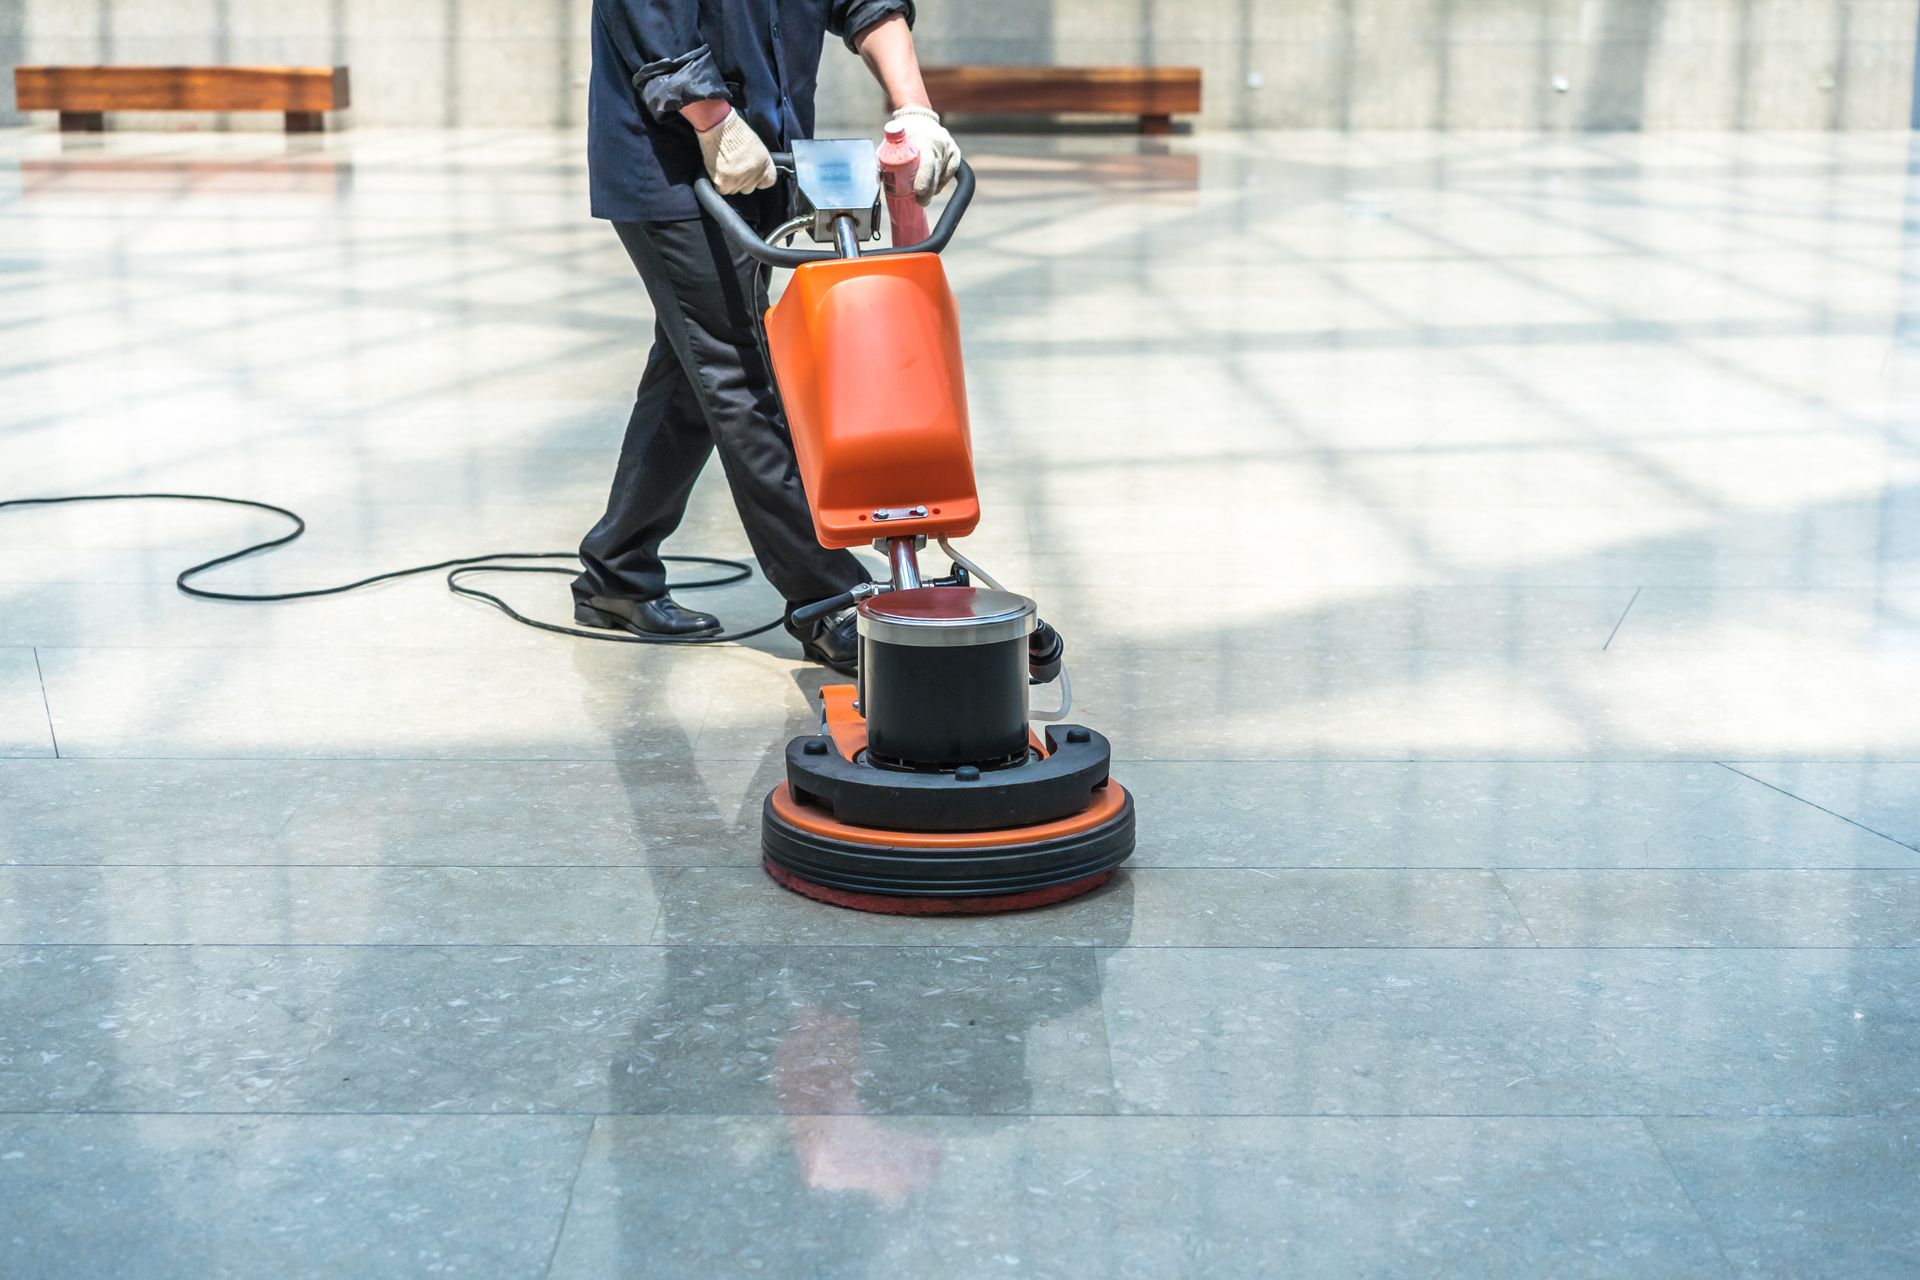 Person using a floor-cleaning machine to efficiently clean and polish the floor surface.